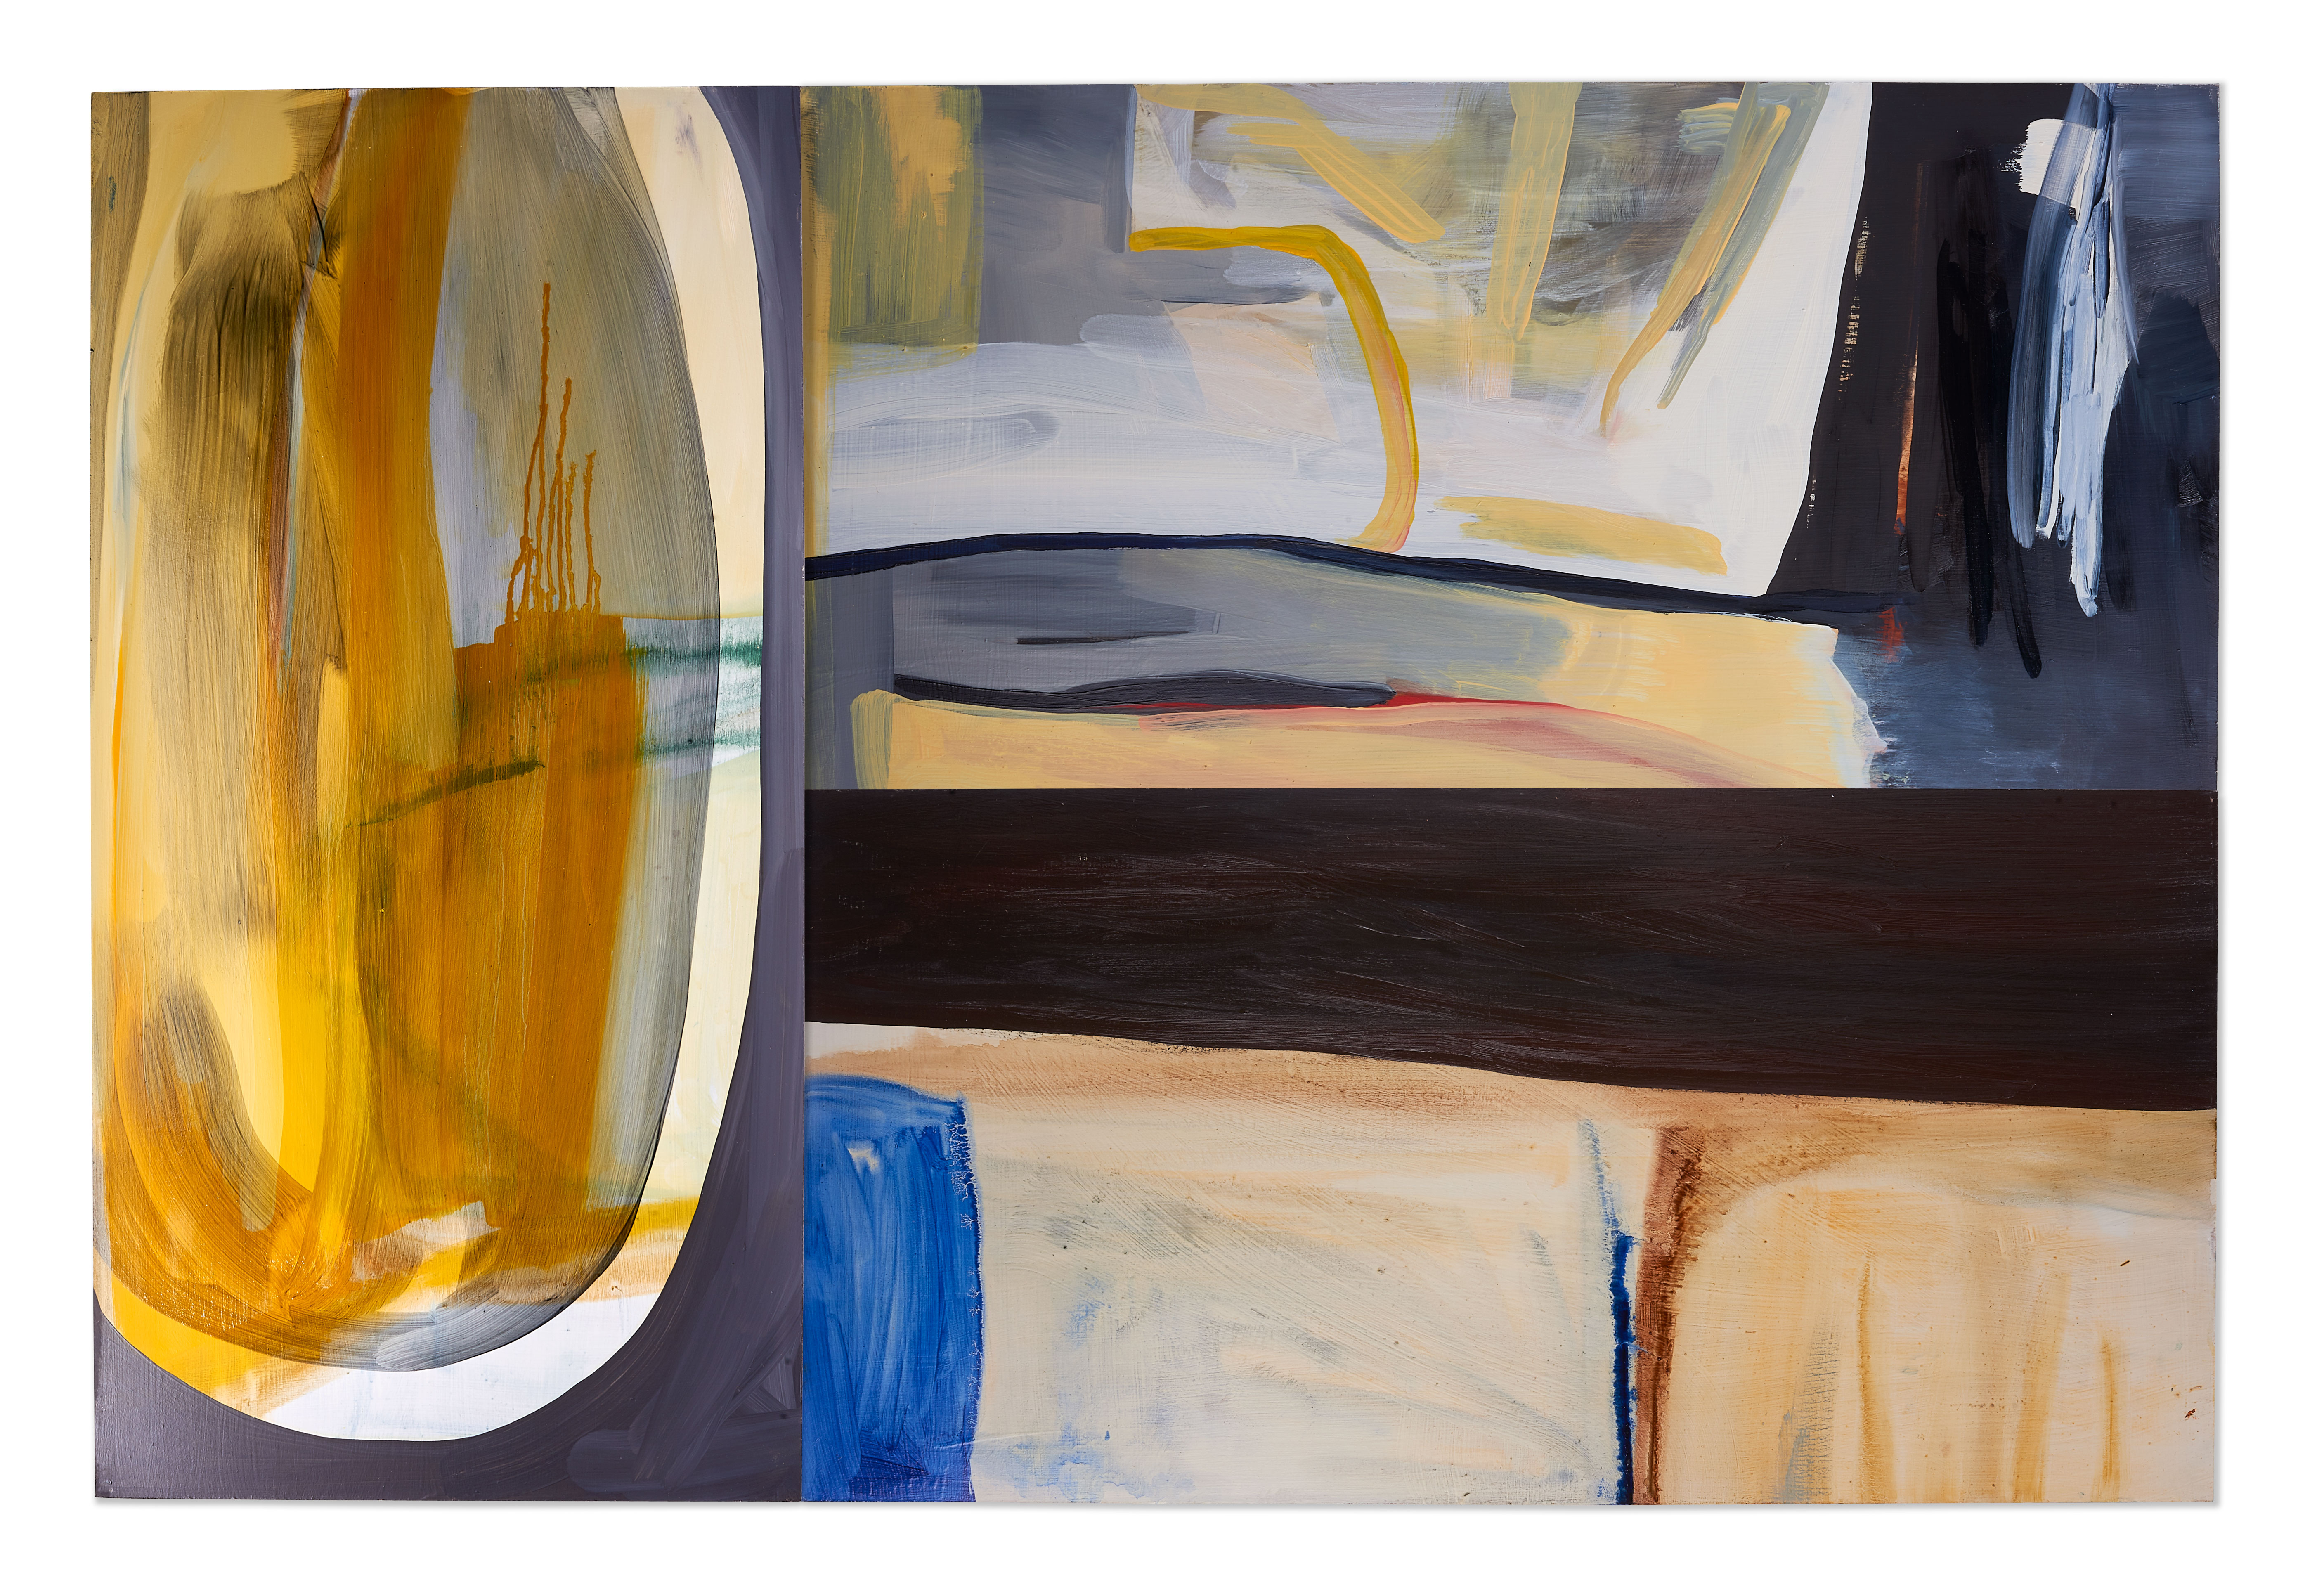 A photograph of a horizontal, rectangular abstract painting by the artist Caroline Coolidge that has a large, primarily oval shape on the left side of the frame and a thick brown horizontal form in the center of the right side. The latter surrounded by more delicate, yellow, white, and brown strokes.